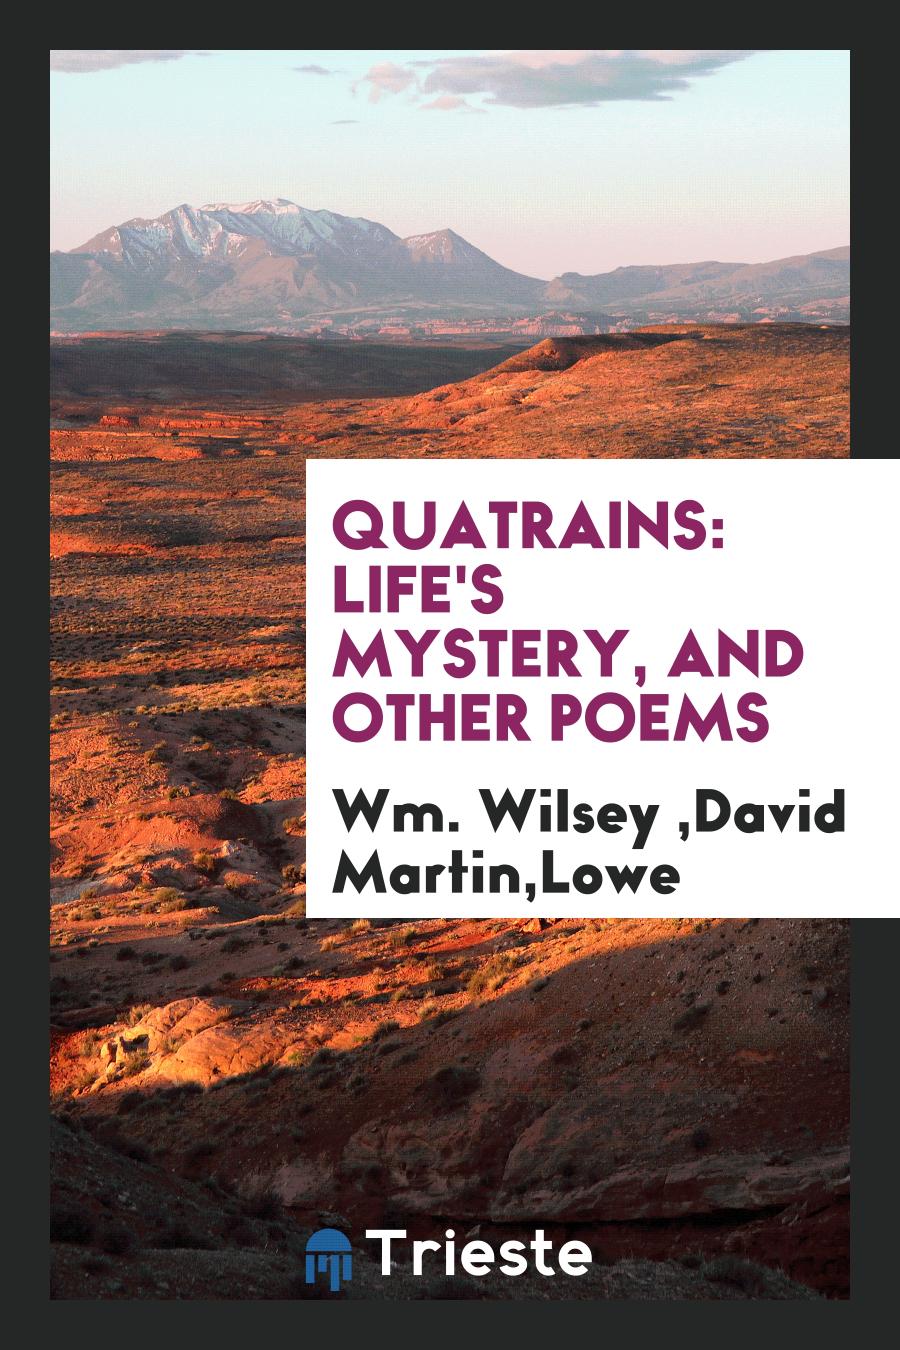 Quatrains: Life's Mystery, and Other Poems